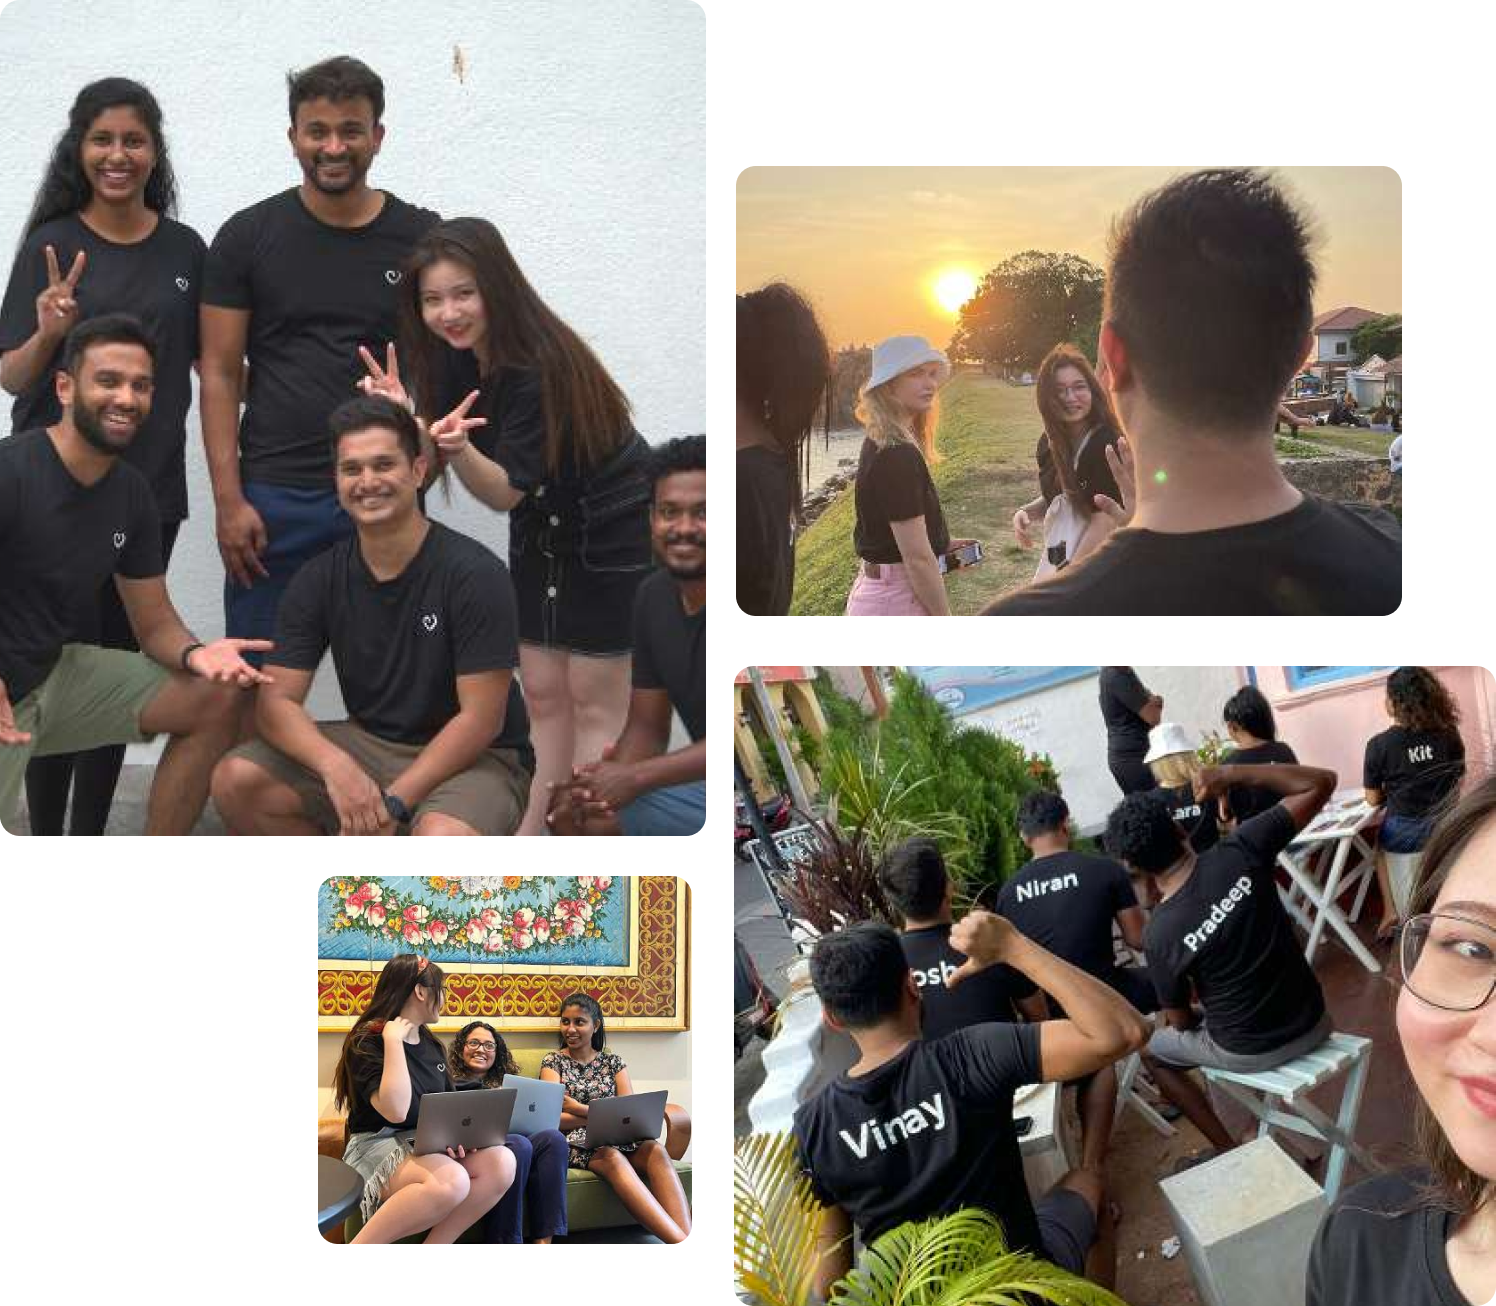 A collage of images showing team members from Capital Placement engaging in entertainment